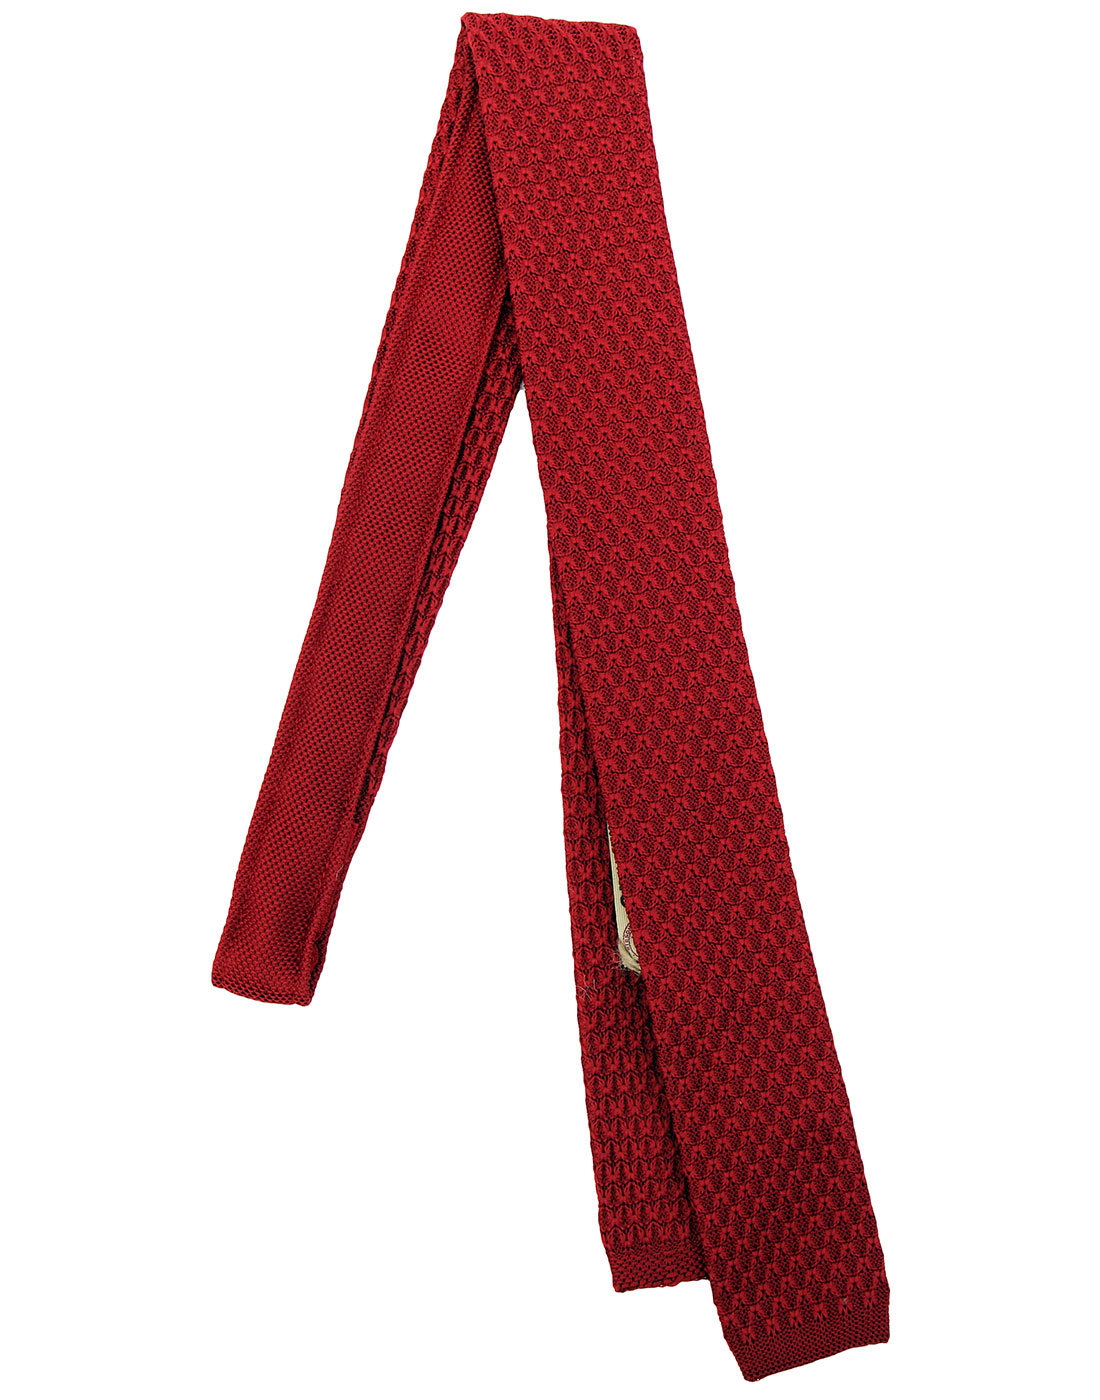 GIBSON LONDON 60s Mod Knitted Square End Tie RED